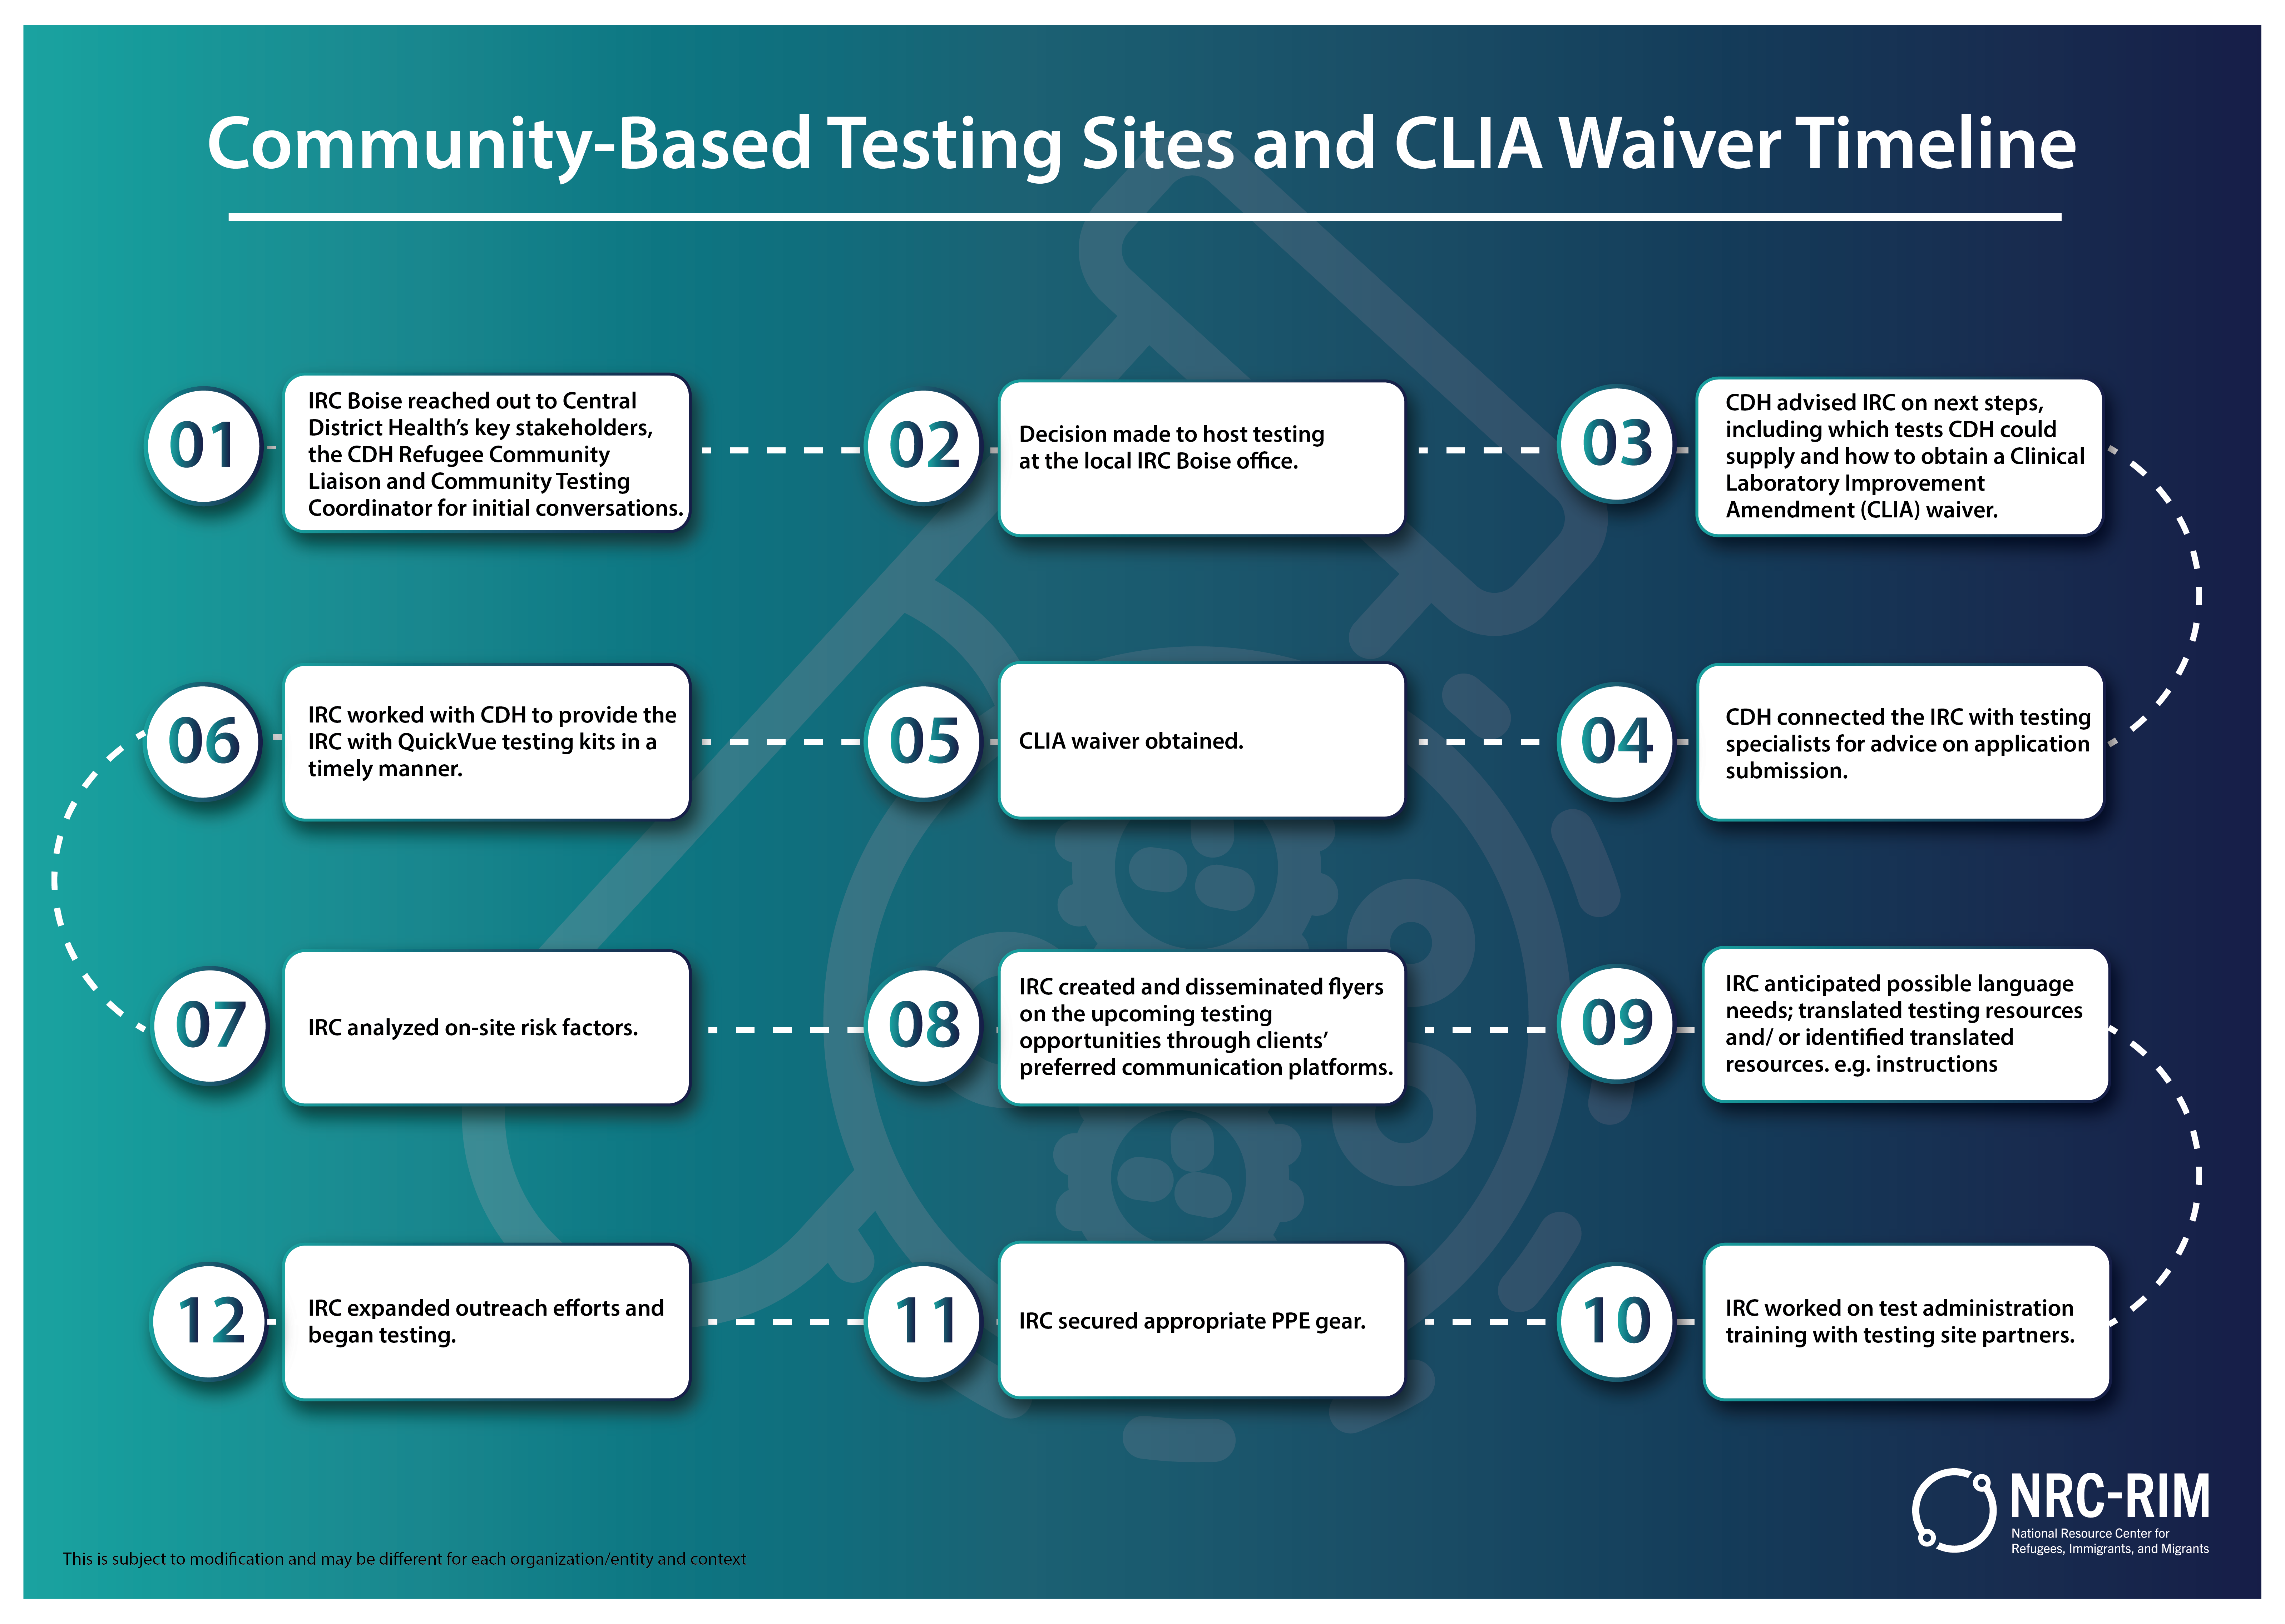 Community-Based Testing Sites and CLIA Waiver Timeline